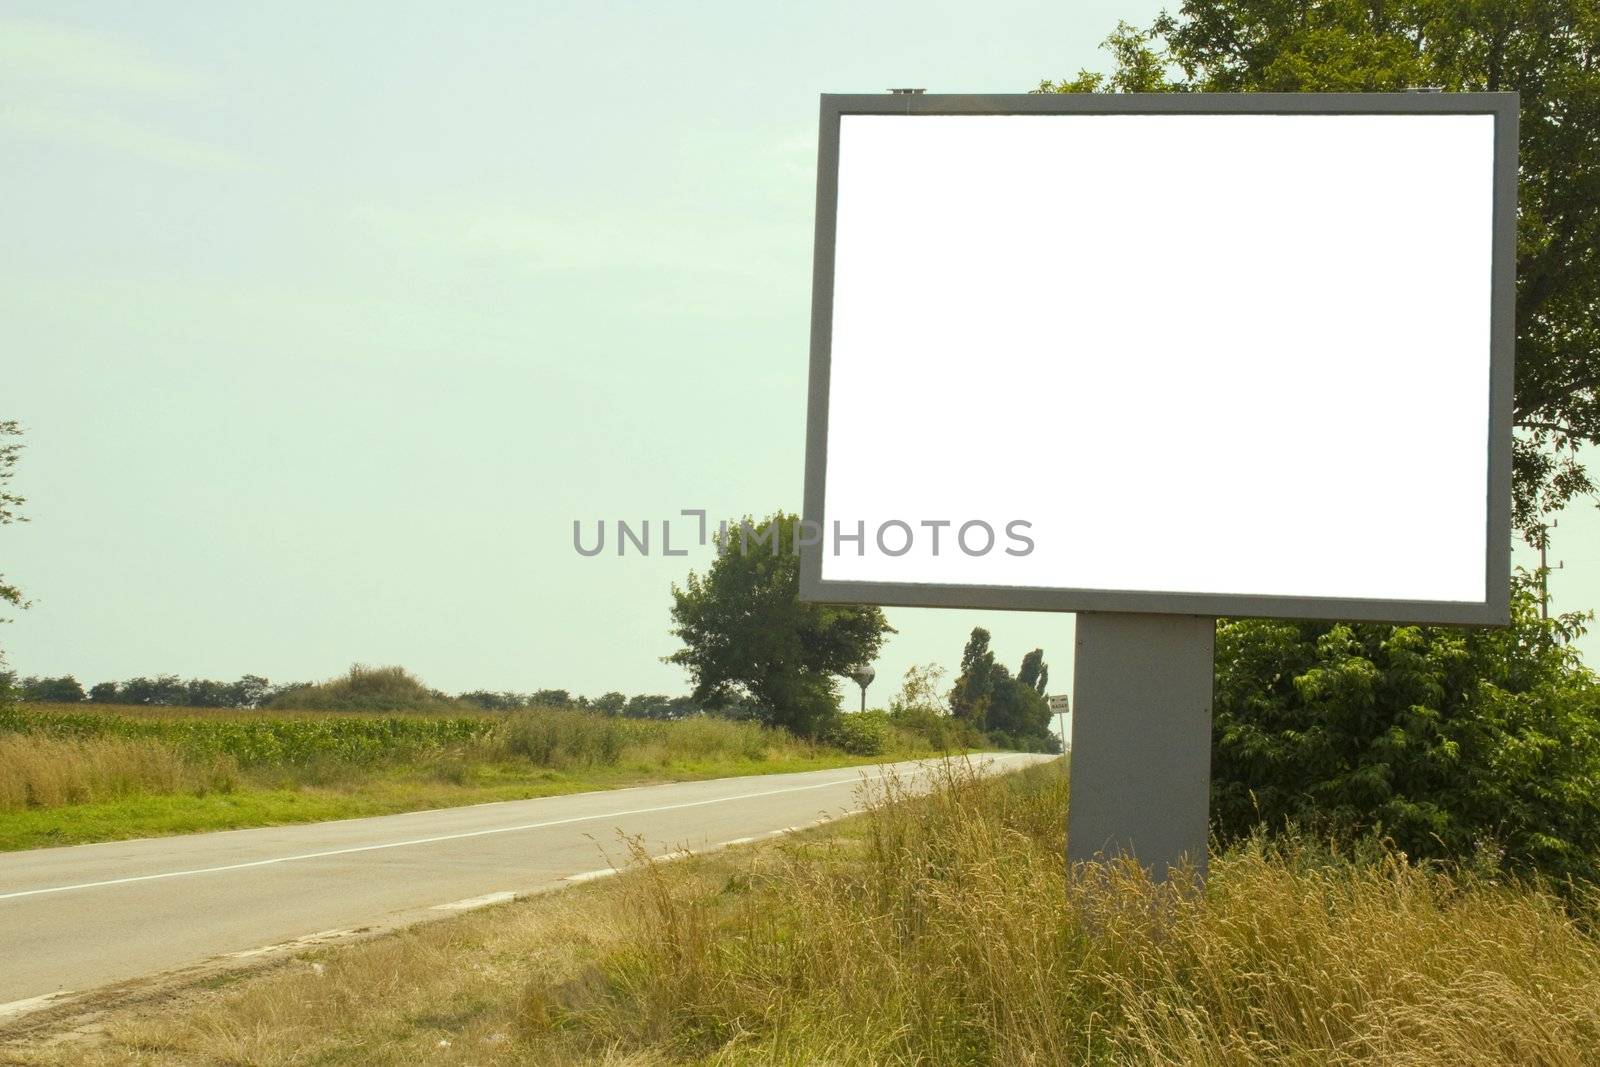 Deserted road with white billboard